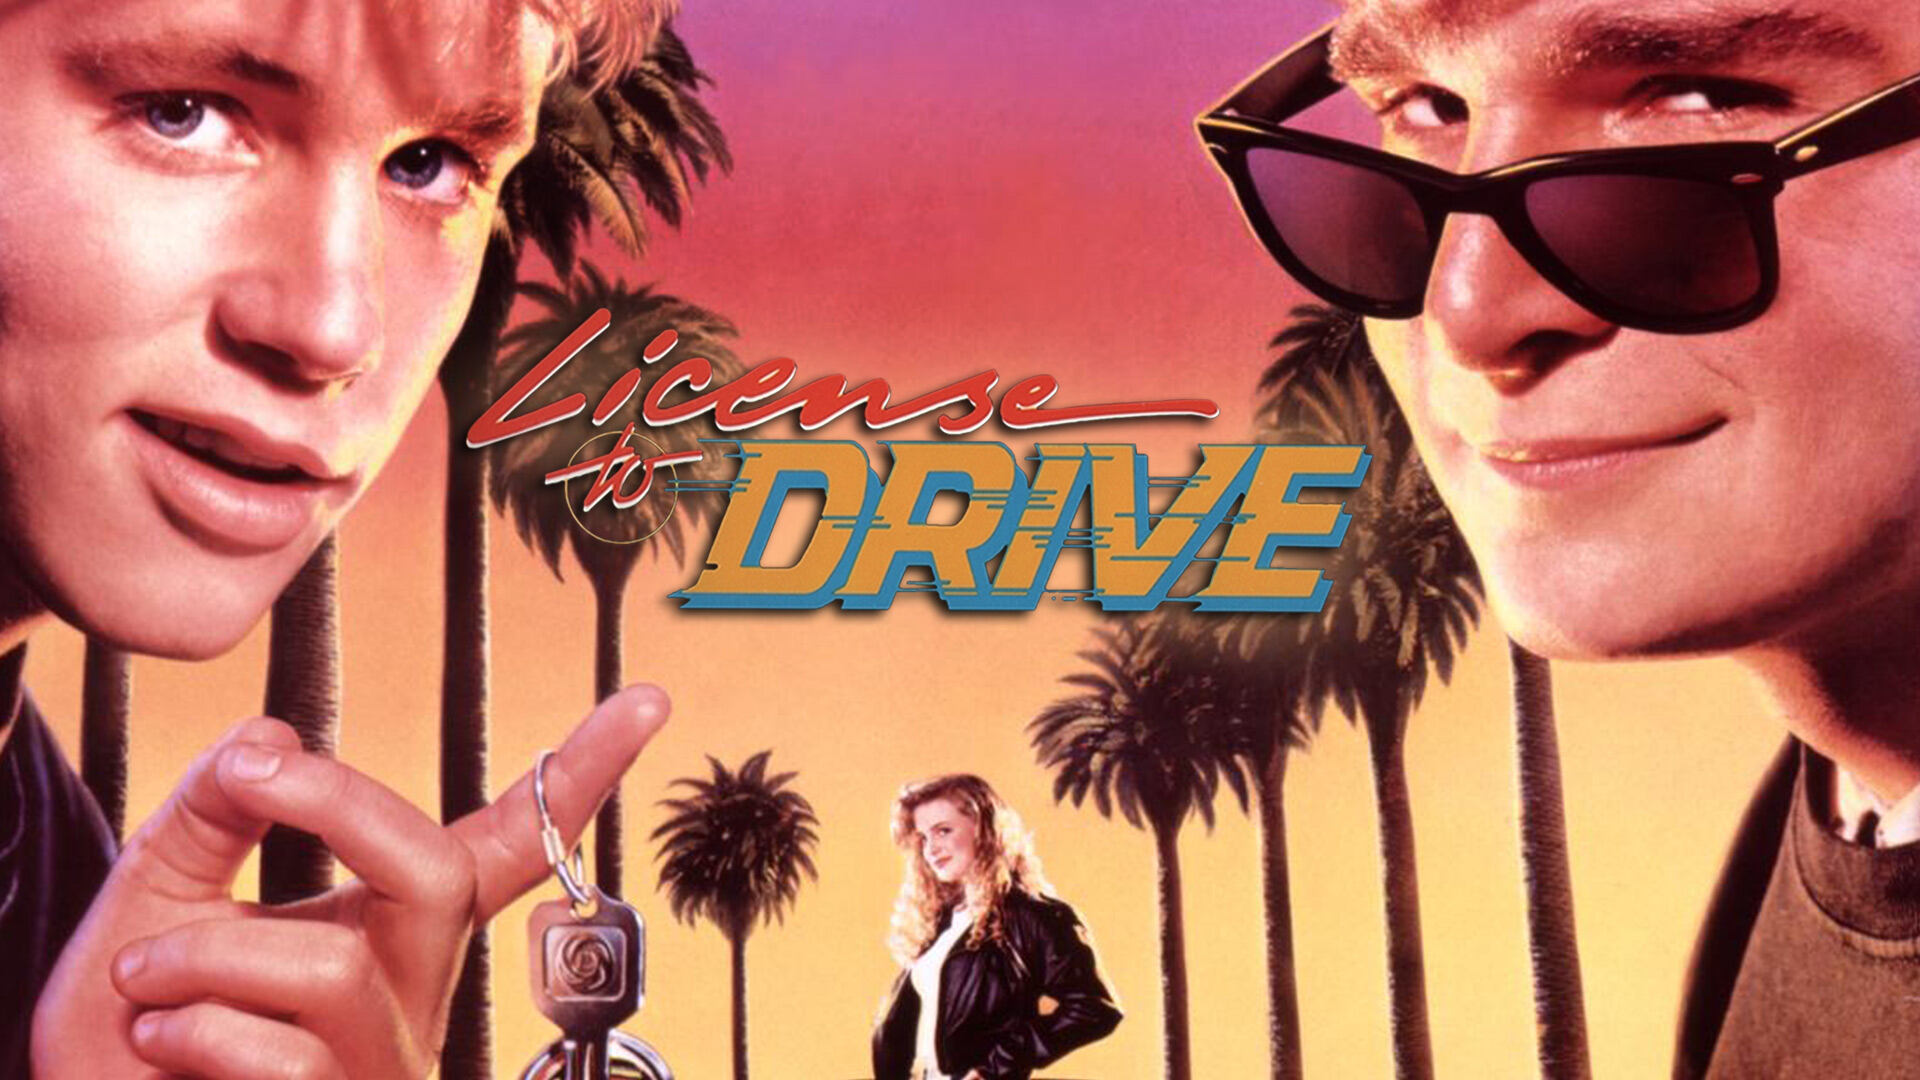 43-facts-about-the-movie-license-to-drive